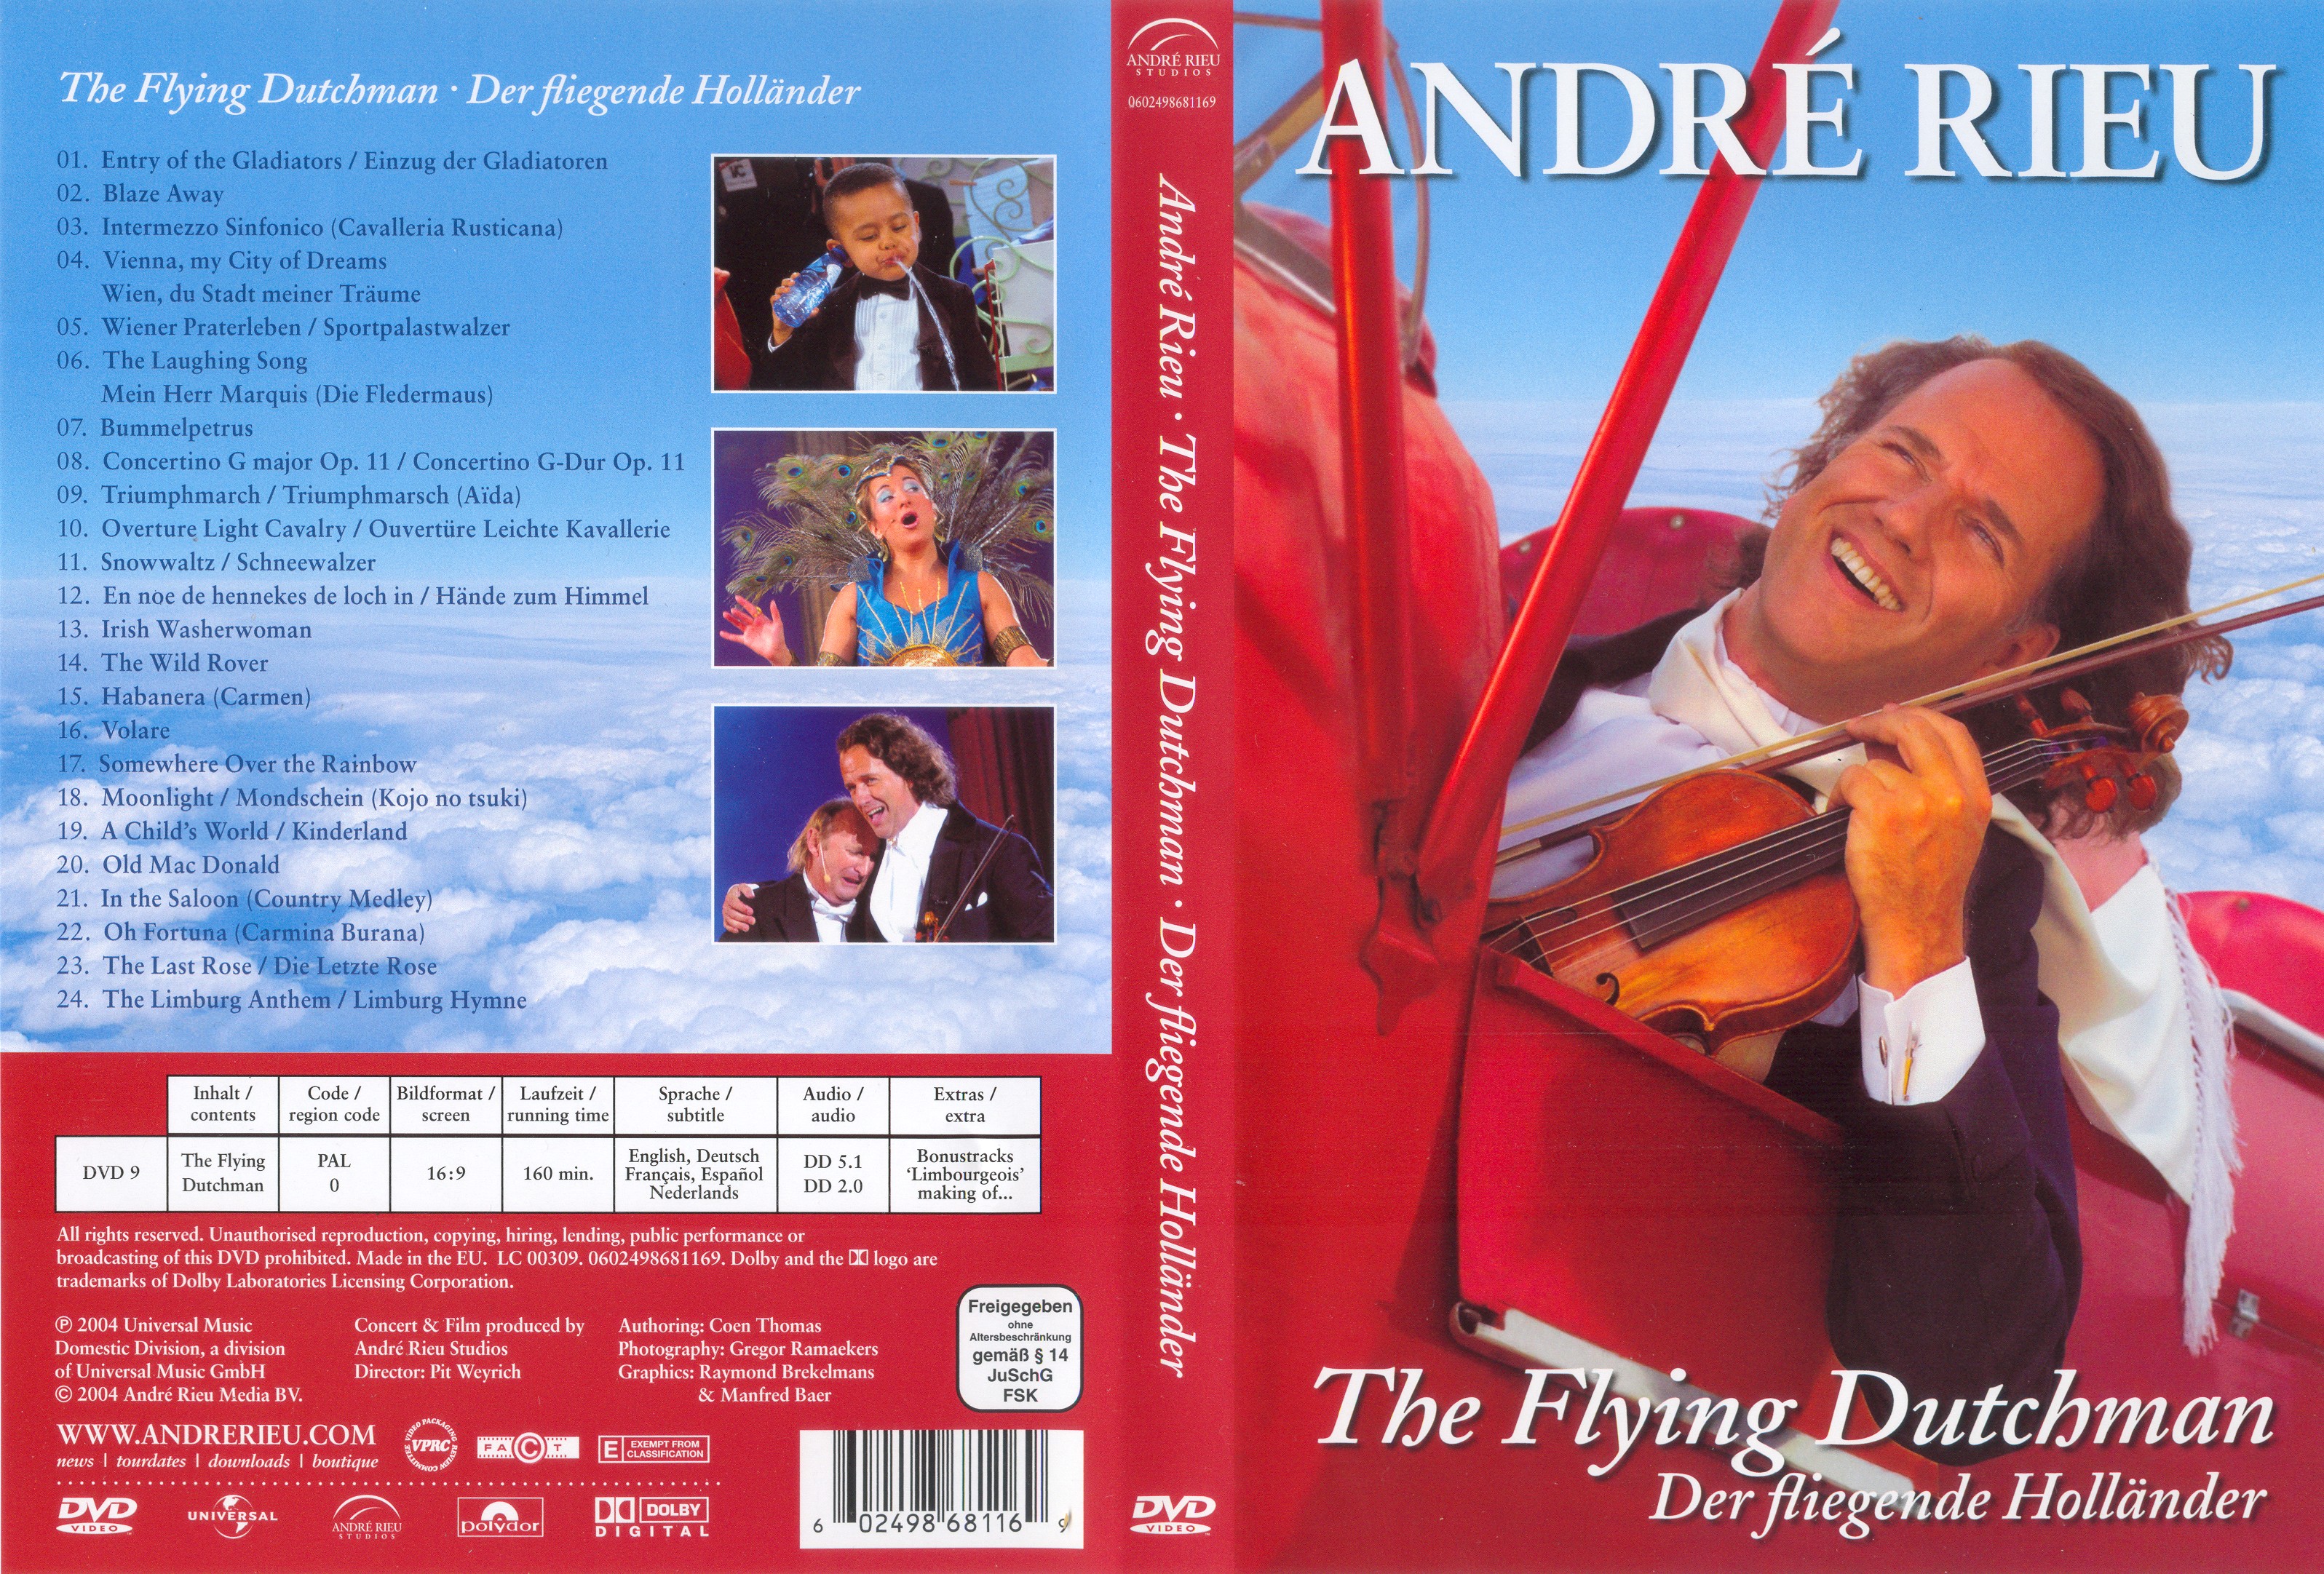 Jaquette DVD Andre Rieu The Flying Dutchman